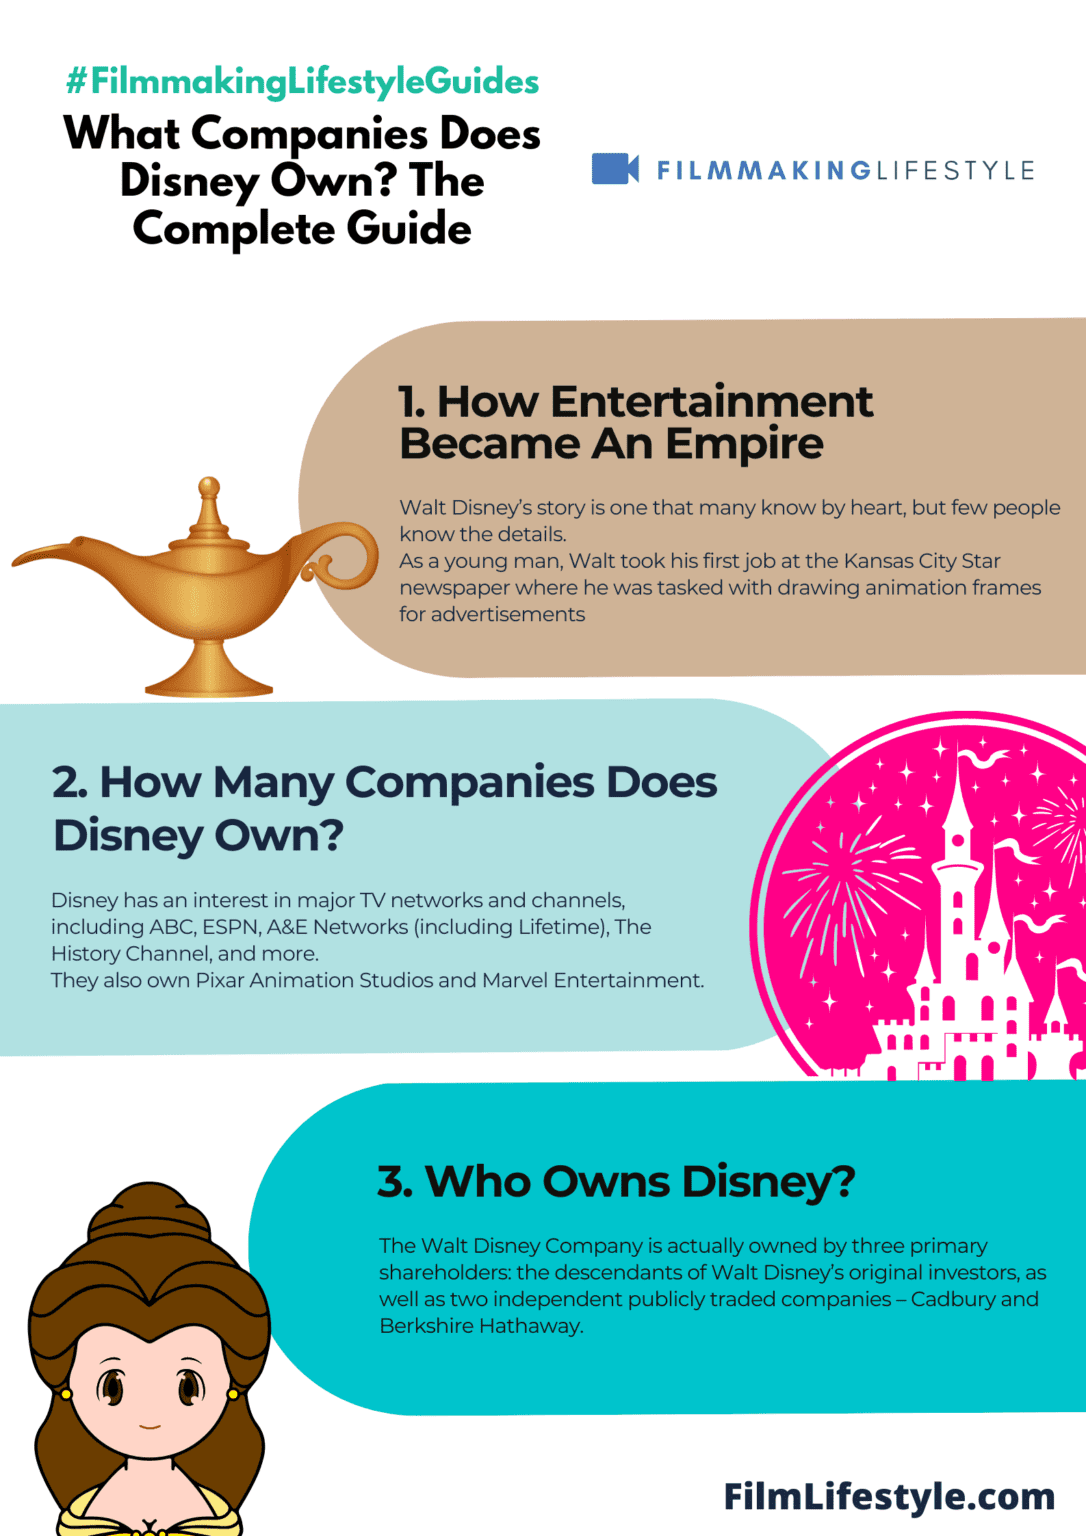 What Companies Does Disney Own? The Complete Guide